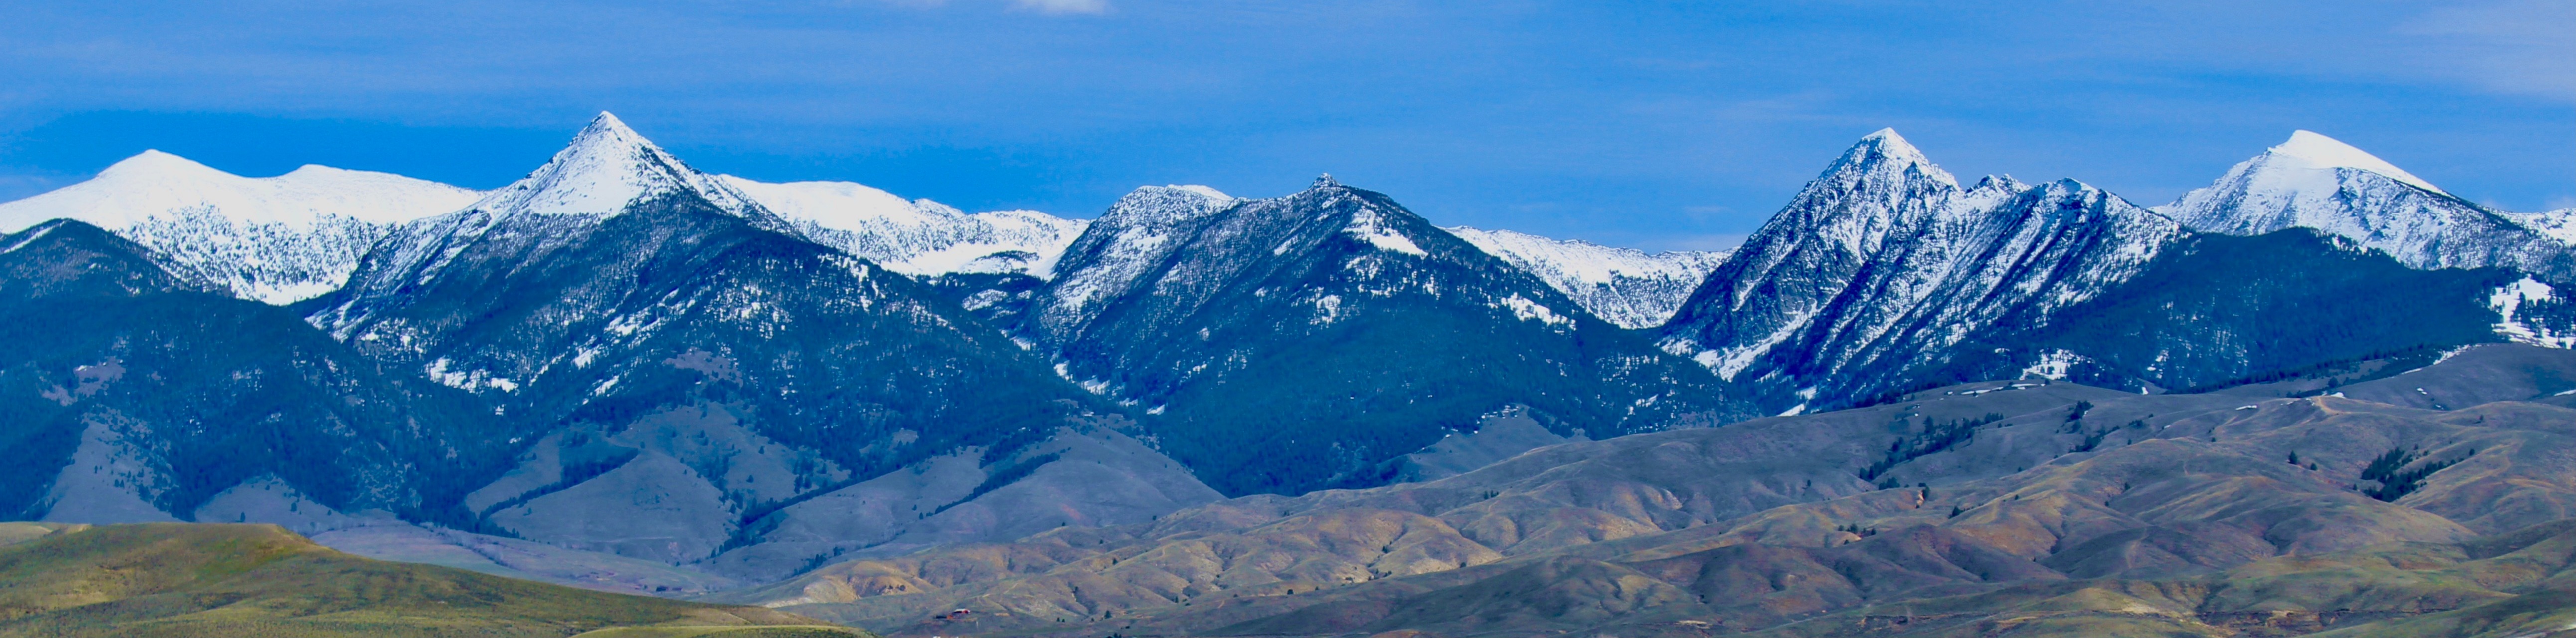 Image of mountains in salmon city